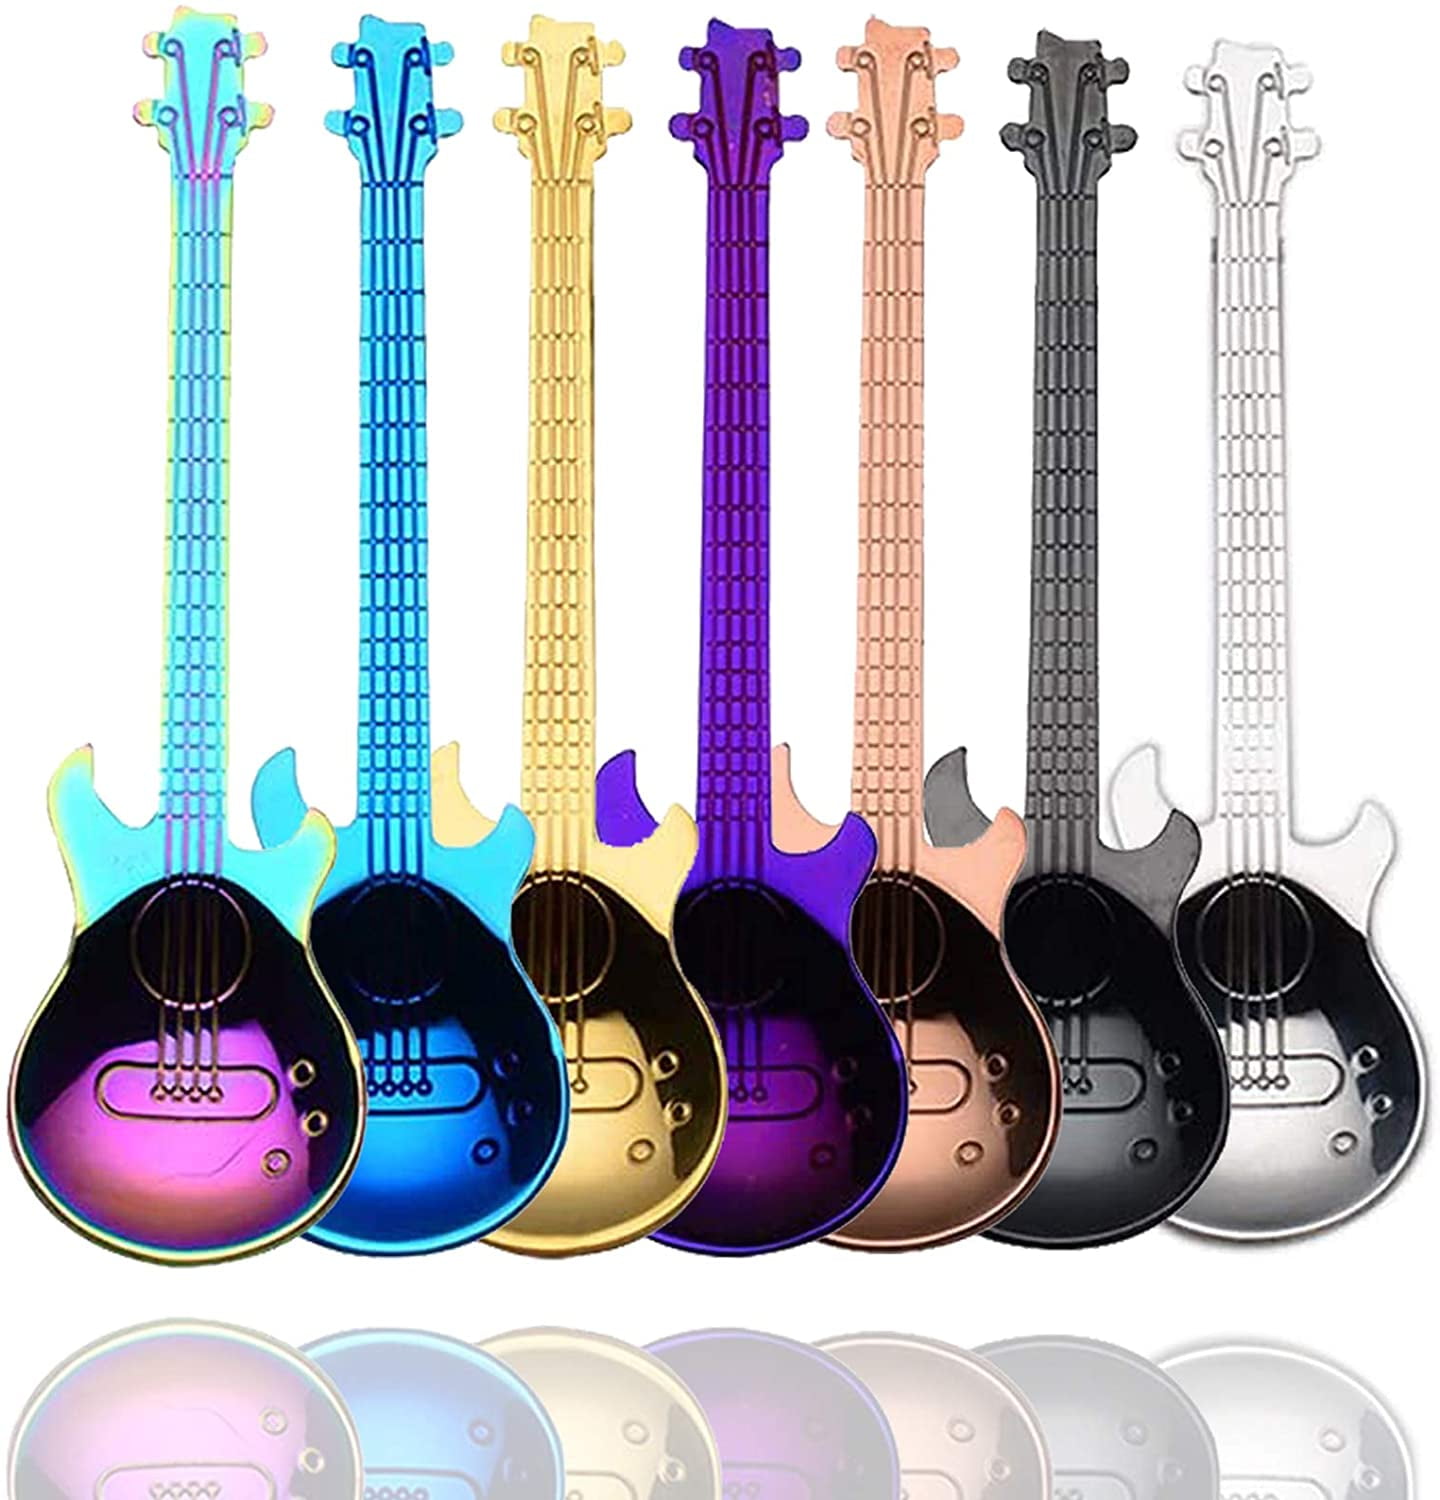 Set of 4 Guitar Shaped Stainless Steel Coffee Spoons Cute & Colorful Hot Sale 